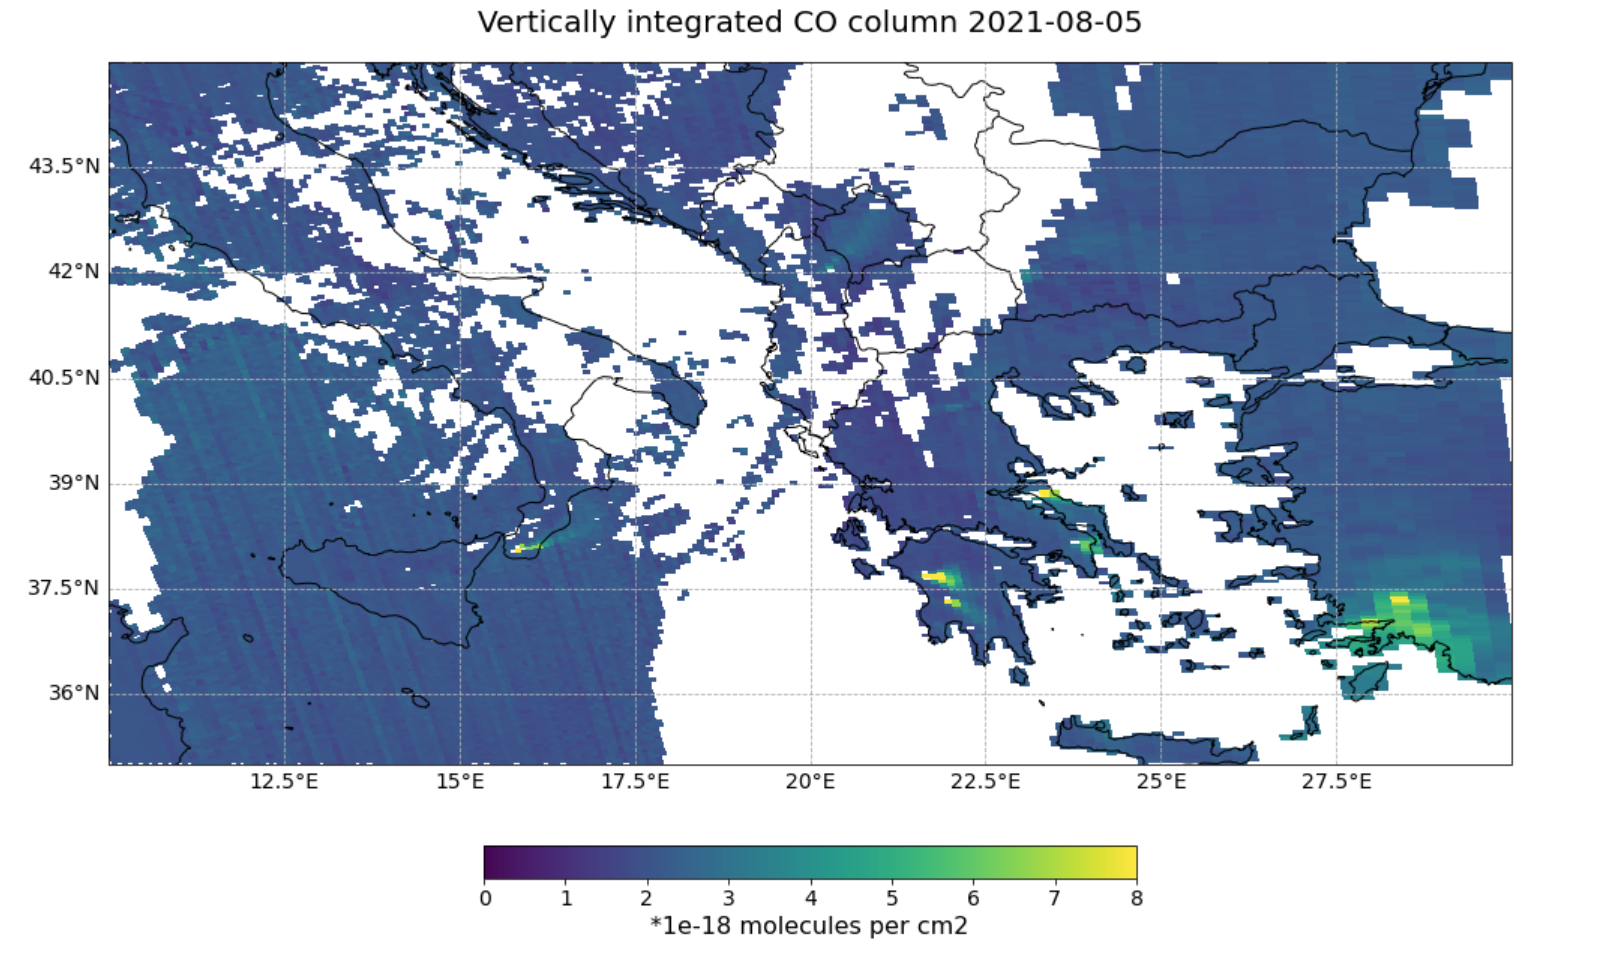 Figure 5. Carbon monoxide (CO) total column Level 2 product from Sentinel-5P TROPOMI over the Mediterranean recorded on 5 August 2021.